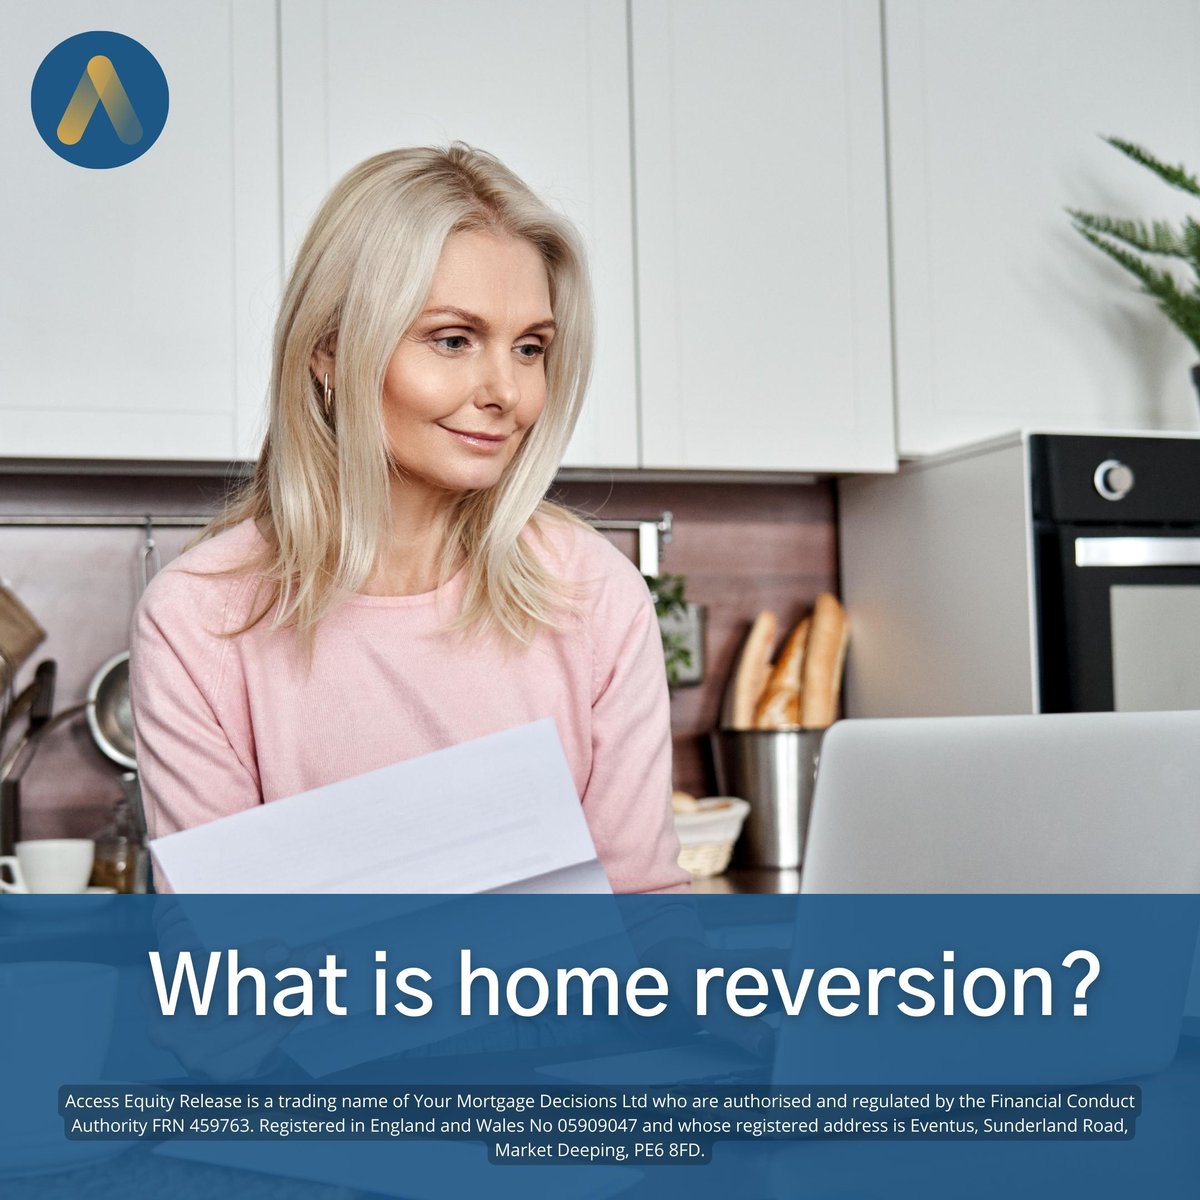 A Home Reversion Plan allows you to access all or part of the value of your property while retaining the right to remain in your property, rent free, for the rest of your life. accessequityrelease.com #equityrelease #homeequity #family #retirement #pension #mortgage #remortgage